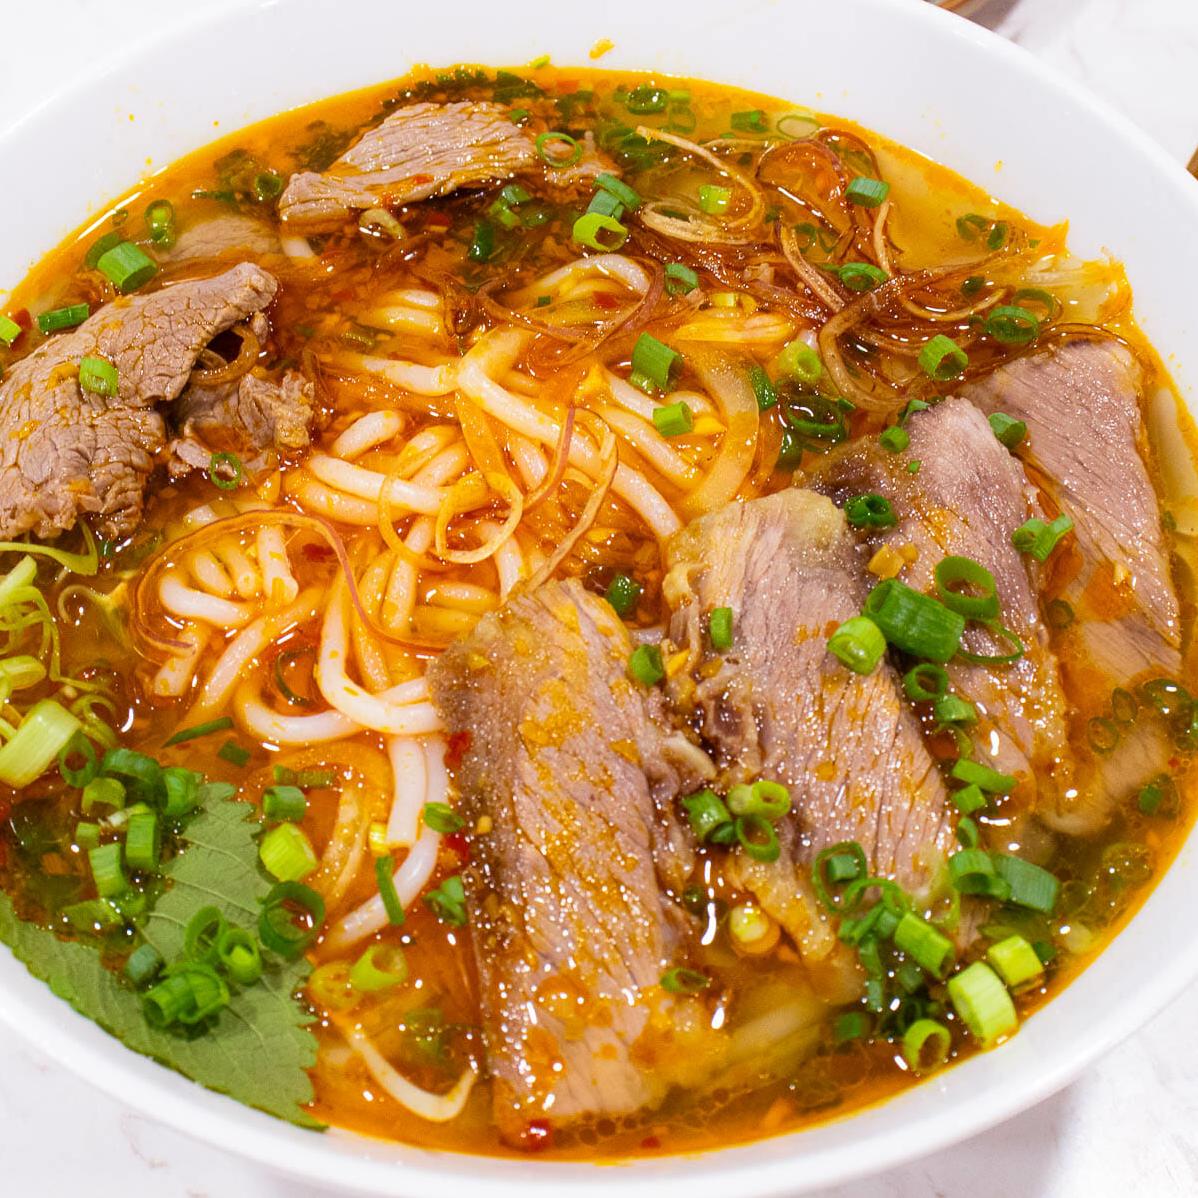  The tender slices of beef in this soup will have you wanting more.